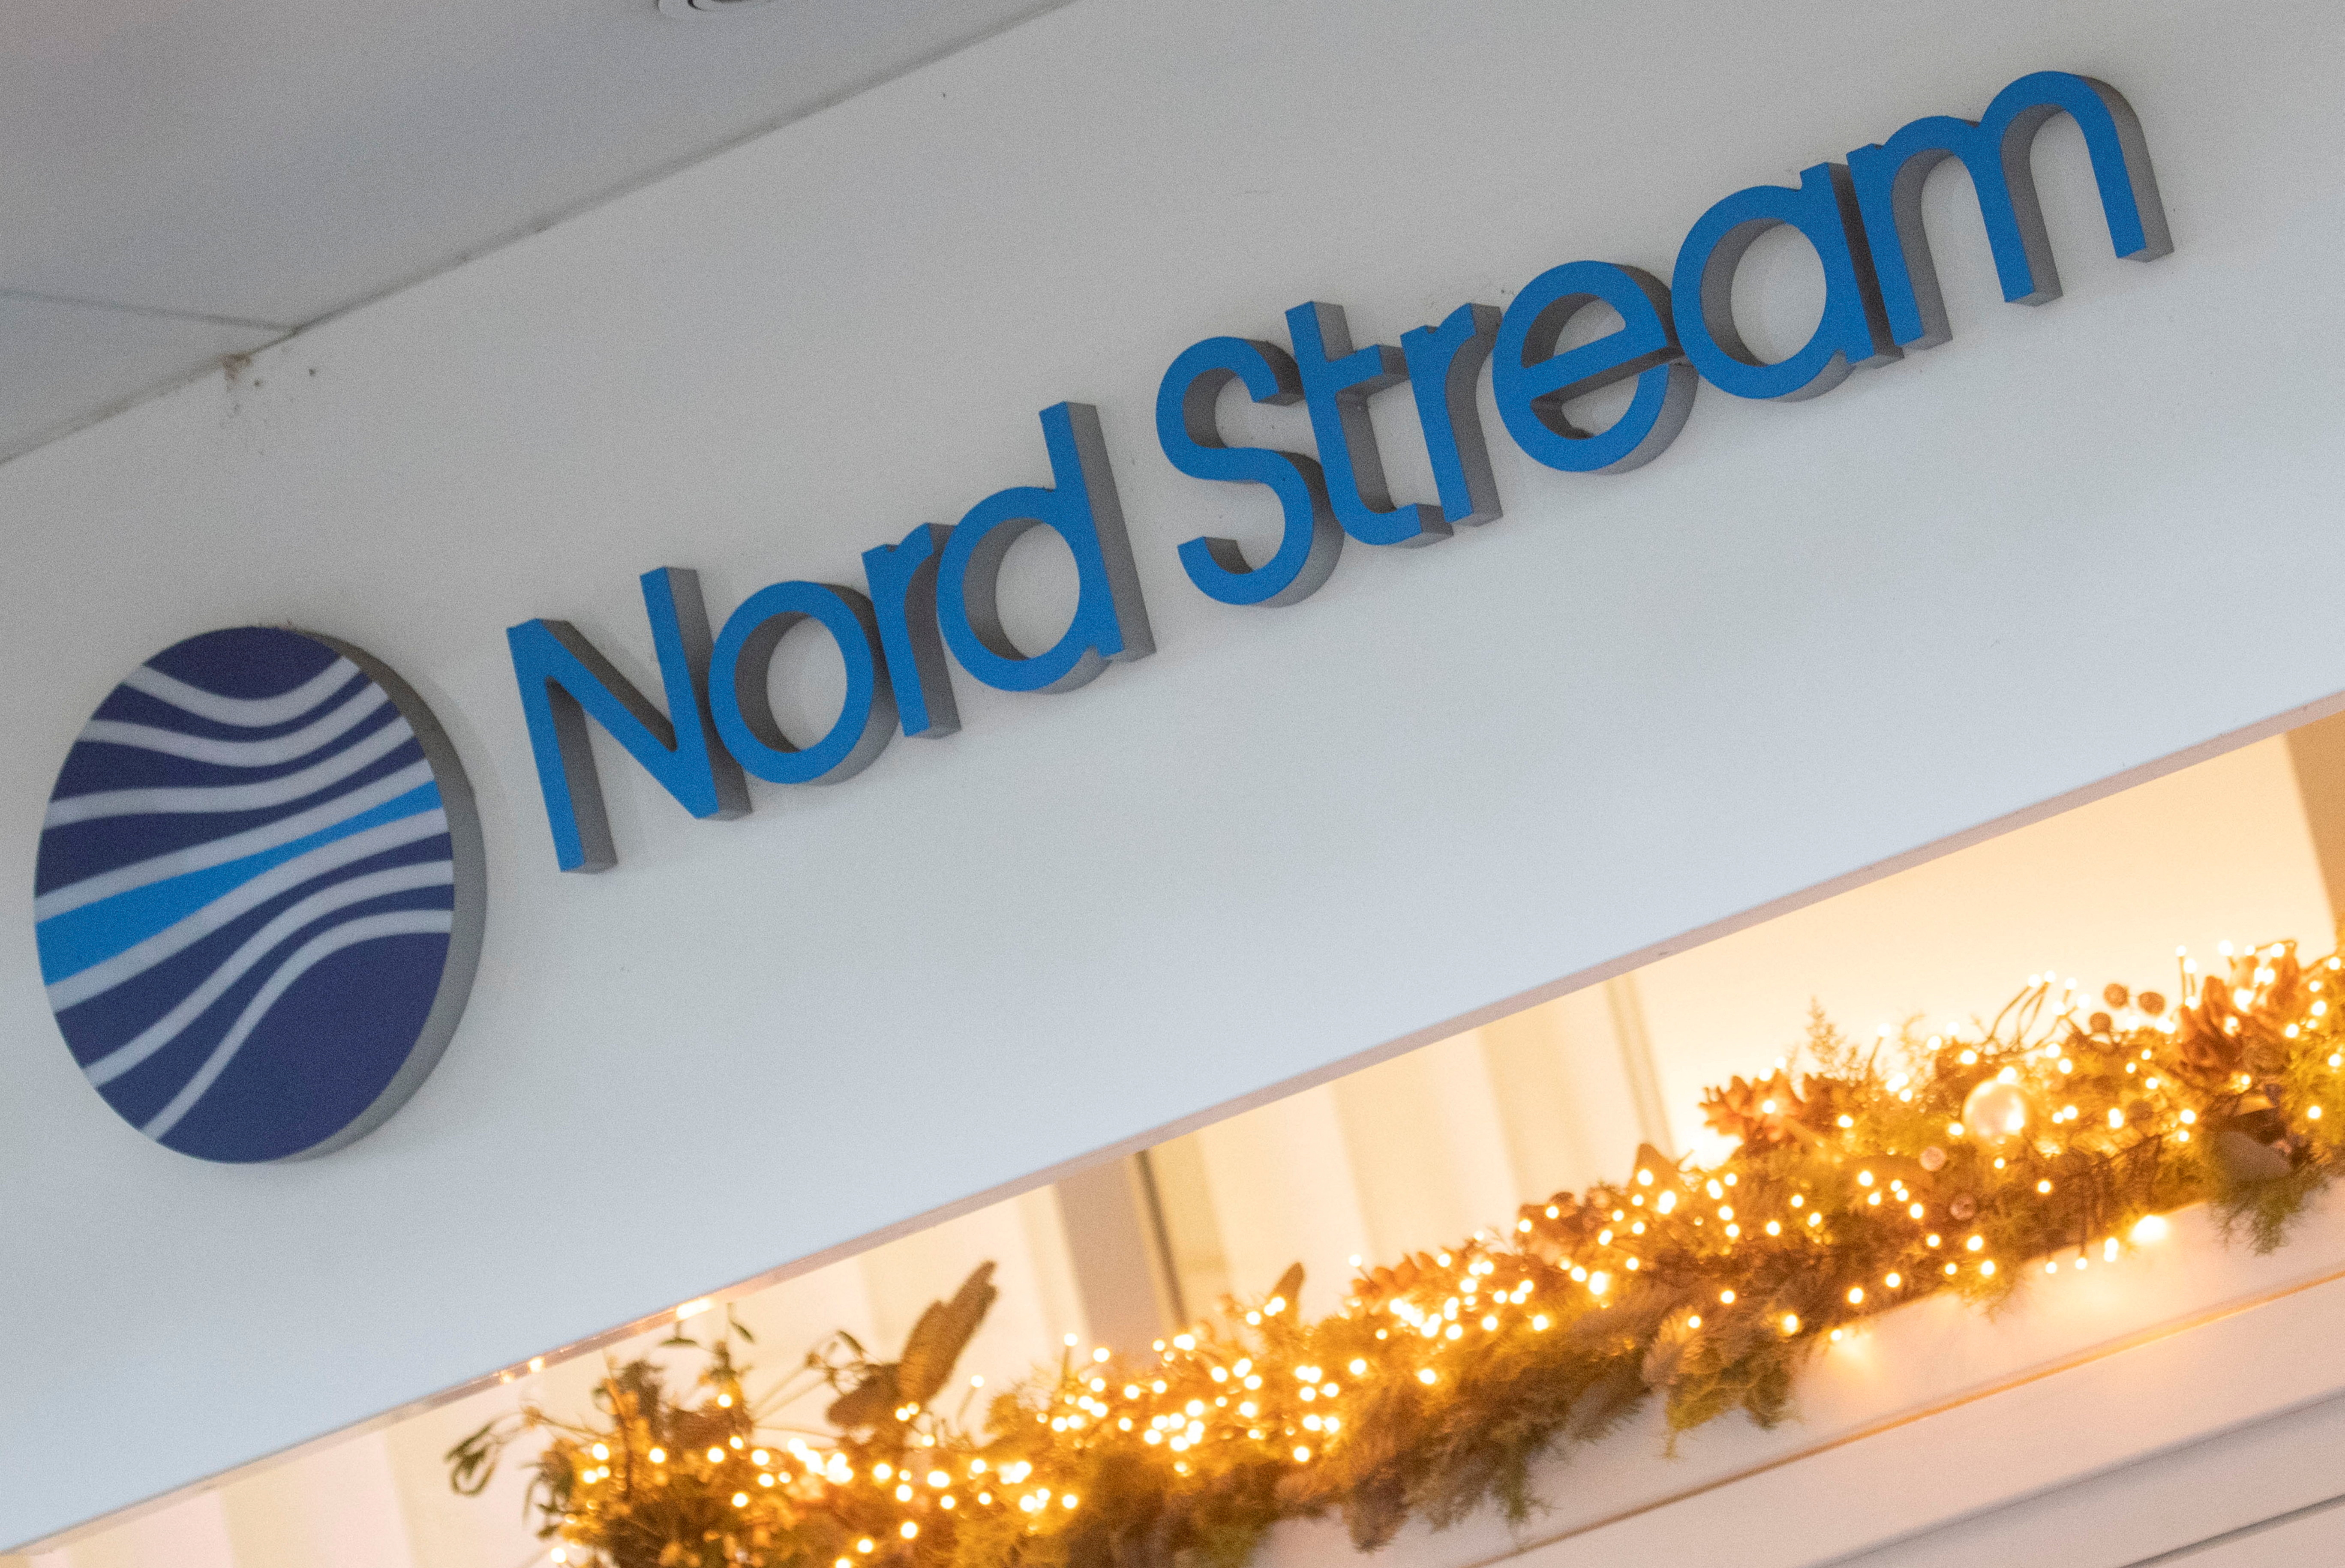 The logo of Nord Stream AG is seen at its headquarters in Zug